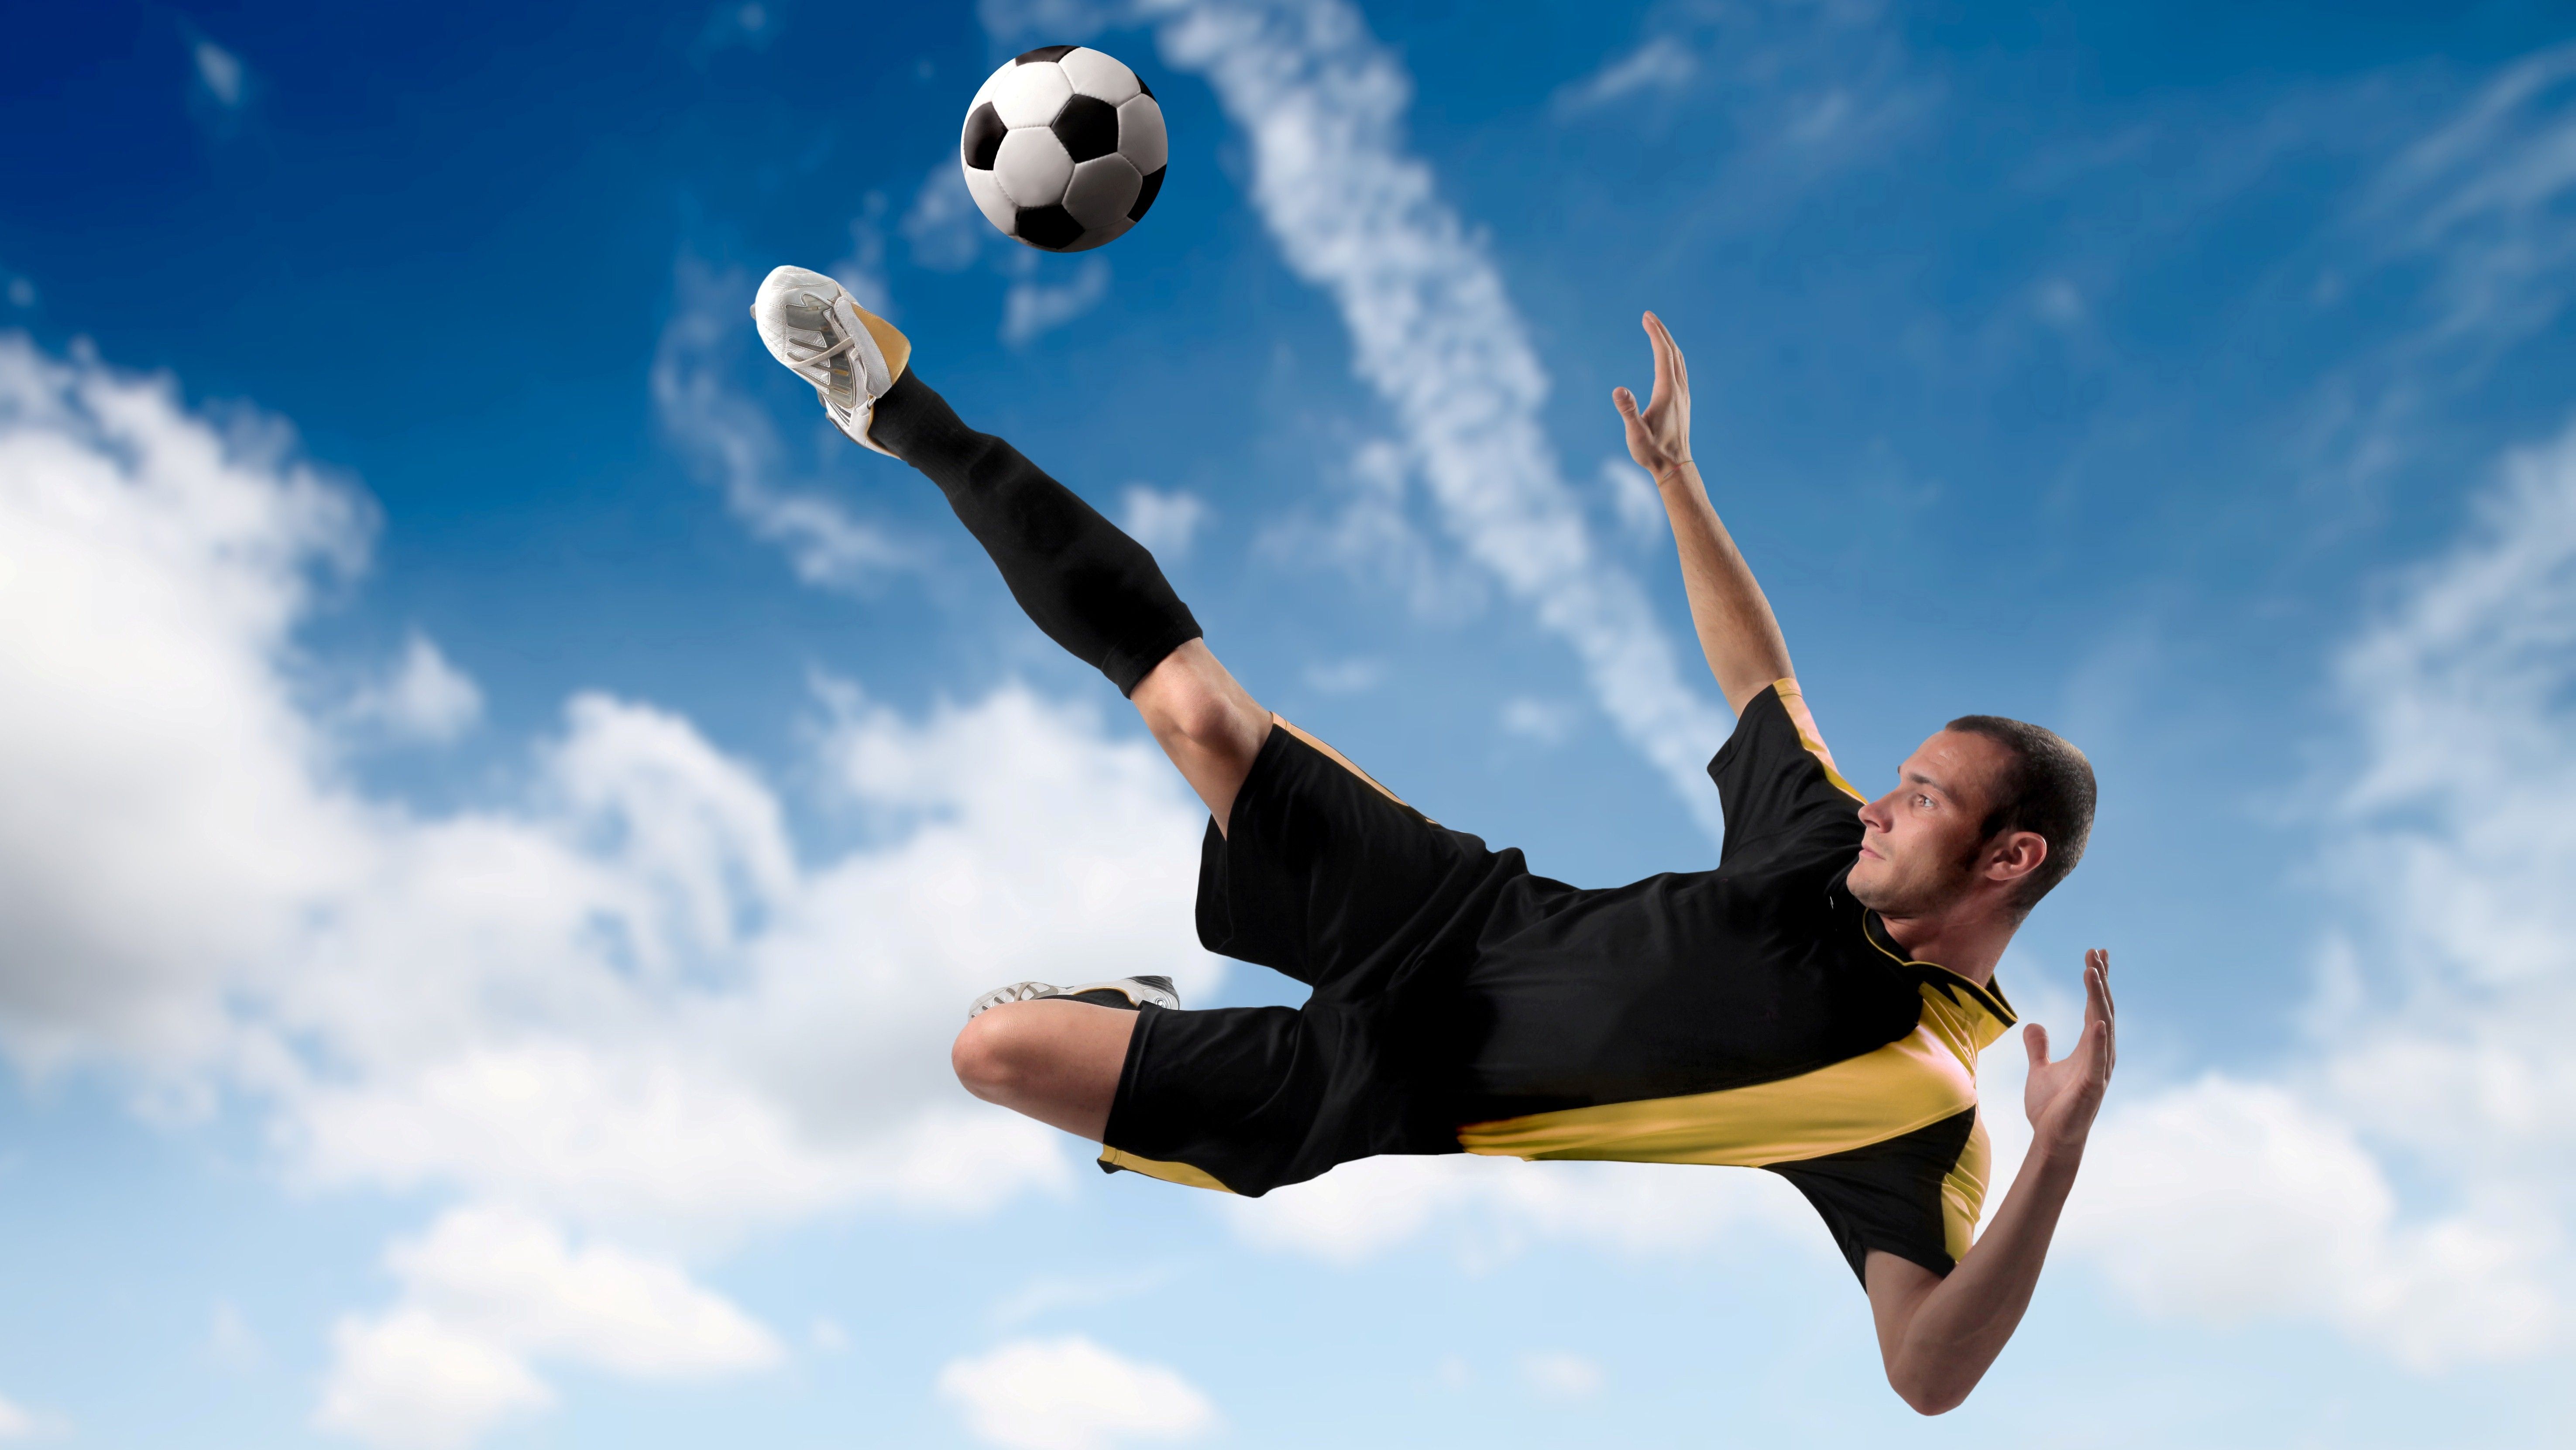 Super Hit in Air By Football Player in Soccer Sport Game Photo ...